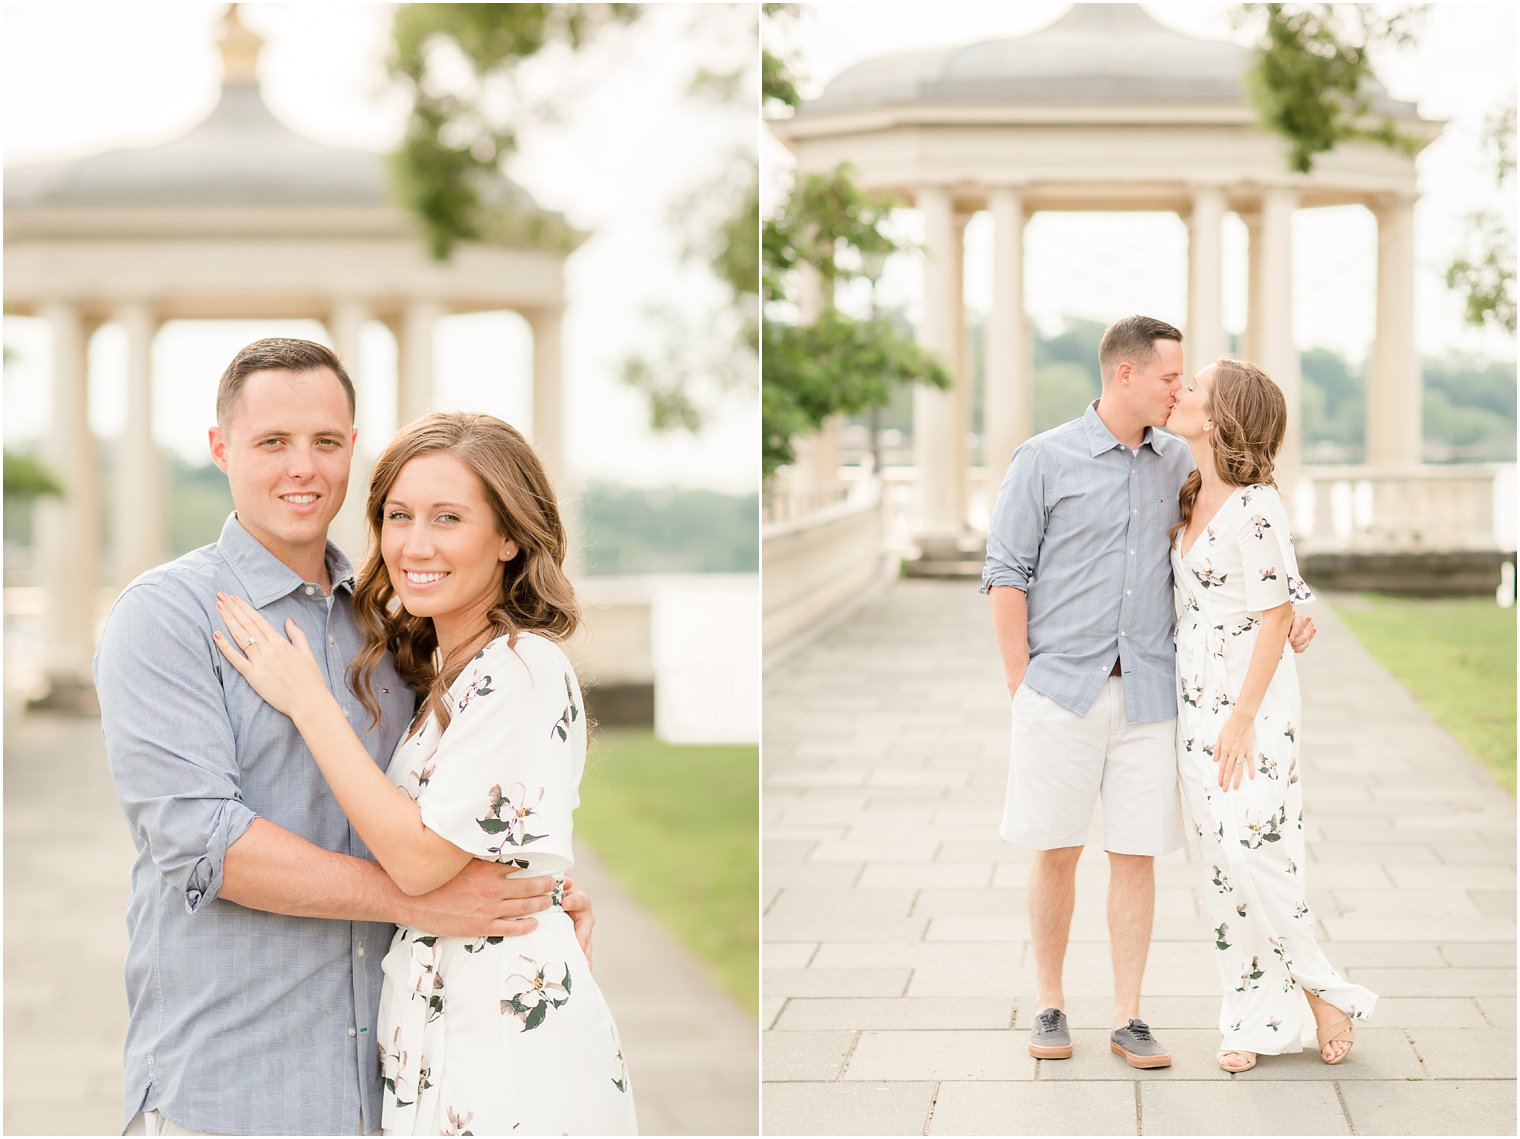 Engagement photos in Philly | Philadelphia Engagement Photography